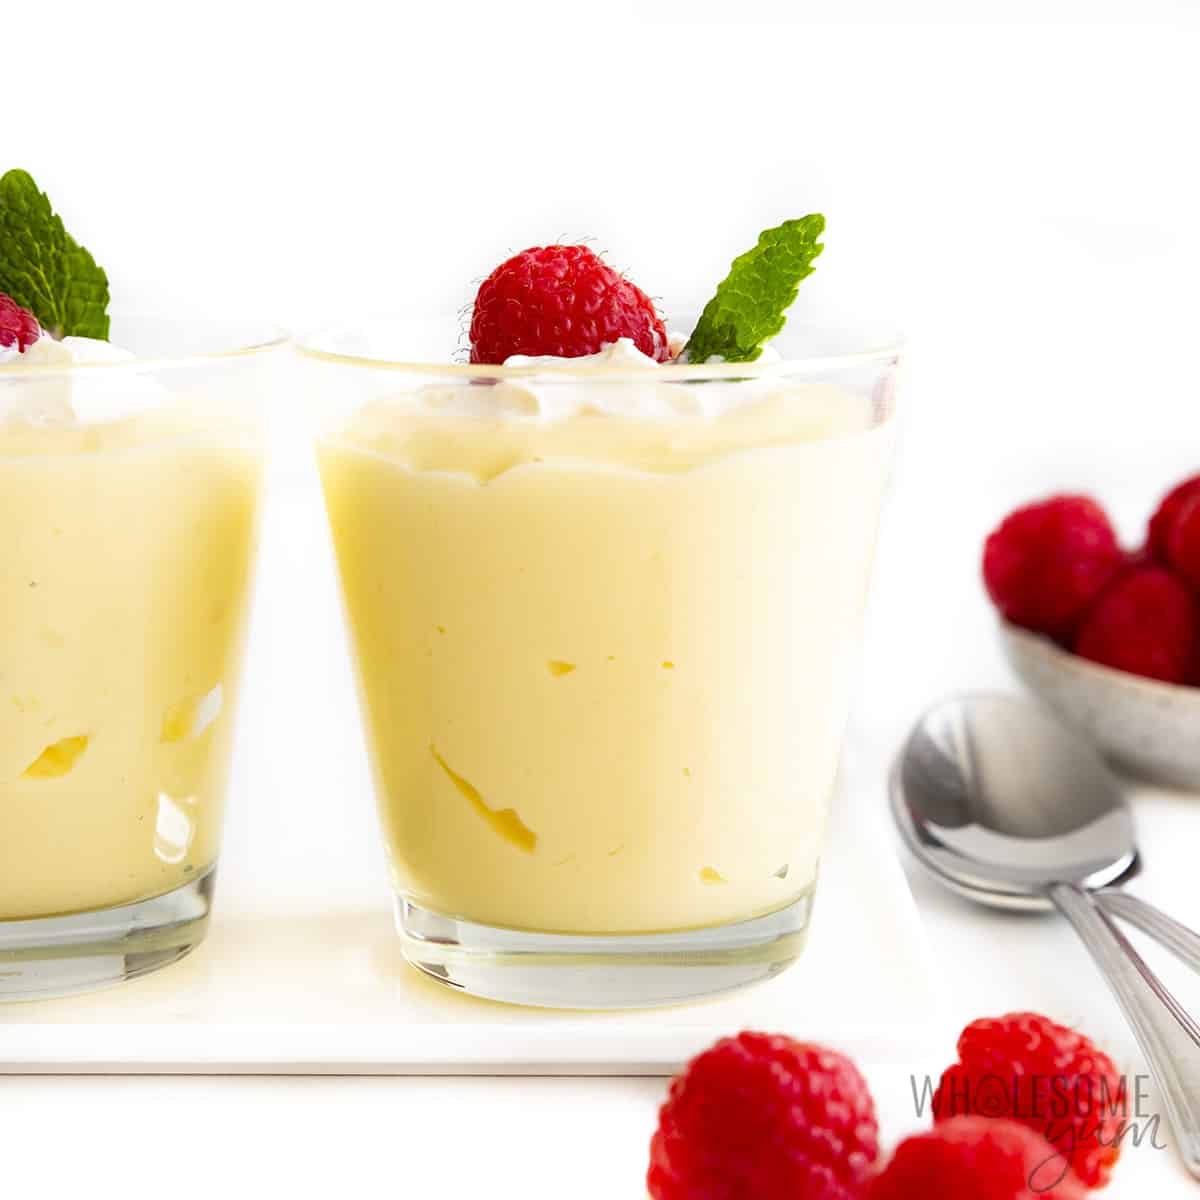 Sugar-free vanilla pudding in cups with raspberries on top.